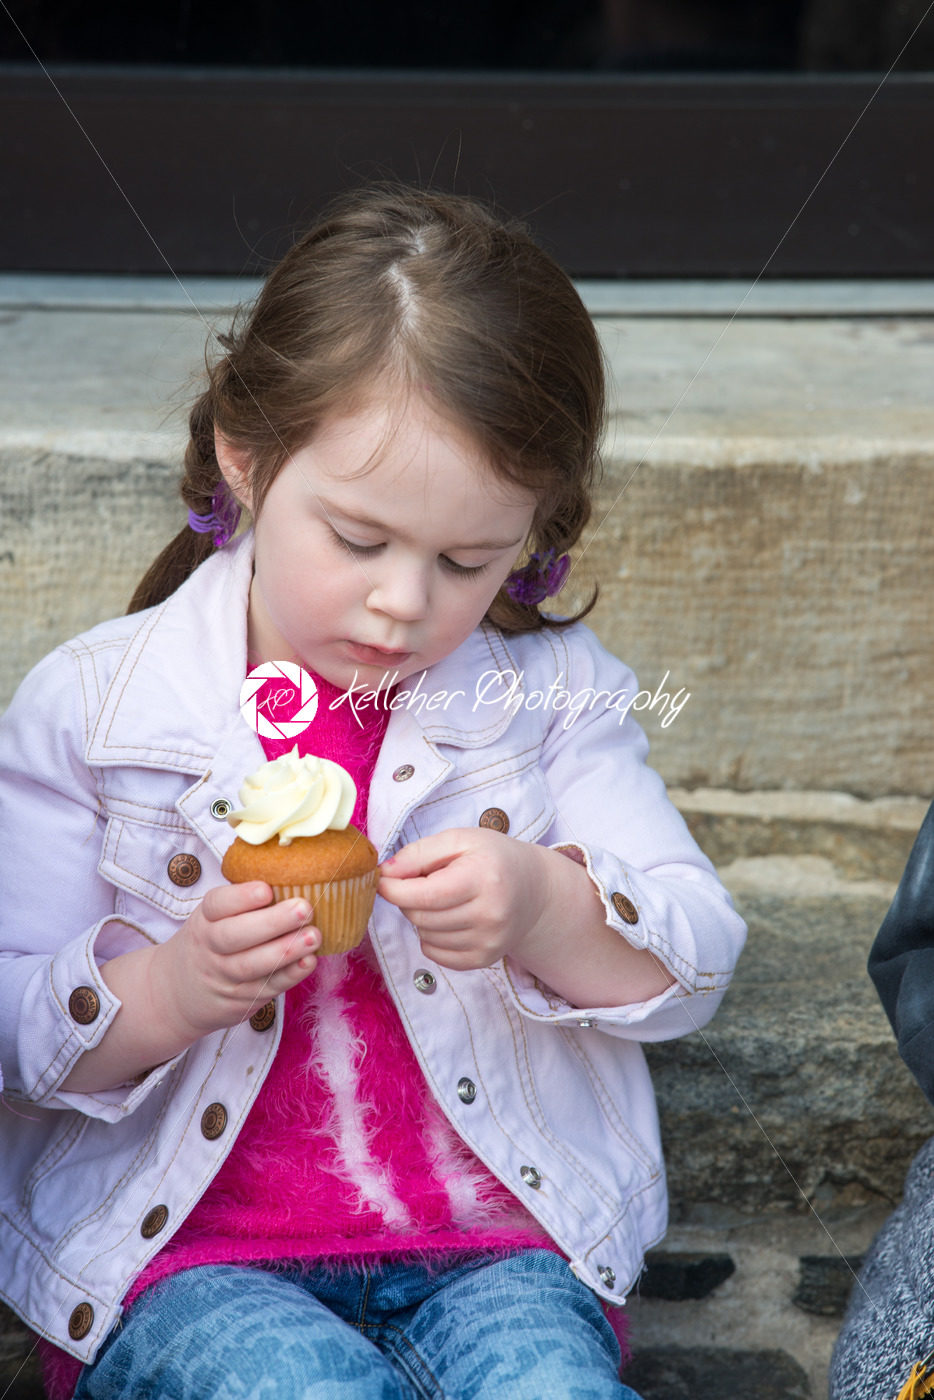 Young girl sitting outside eating a cupcake - Kelleher Photography Store